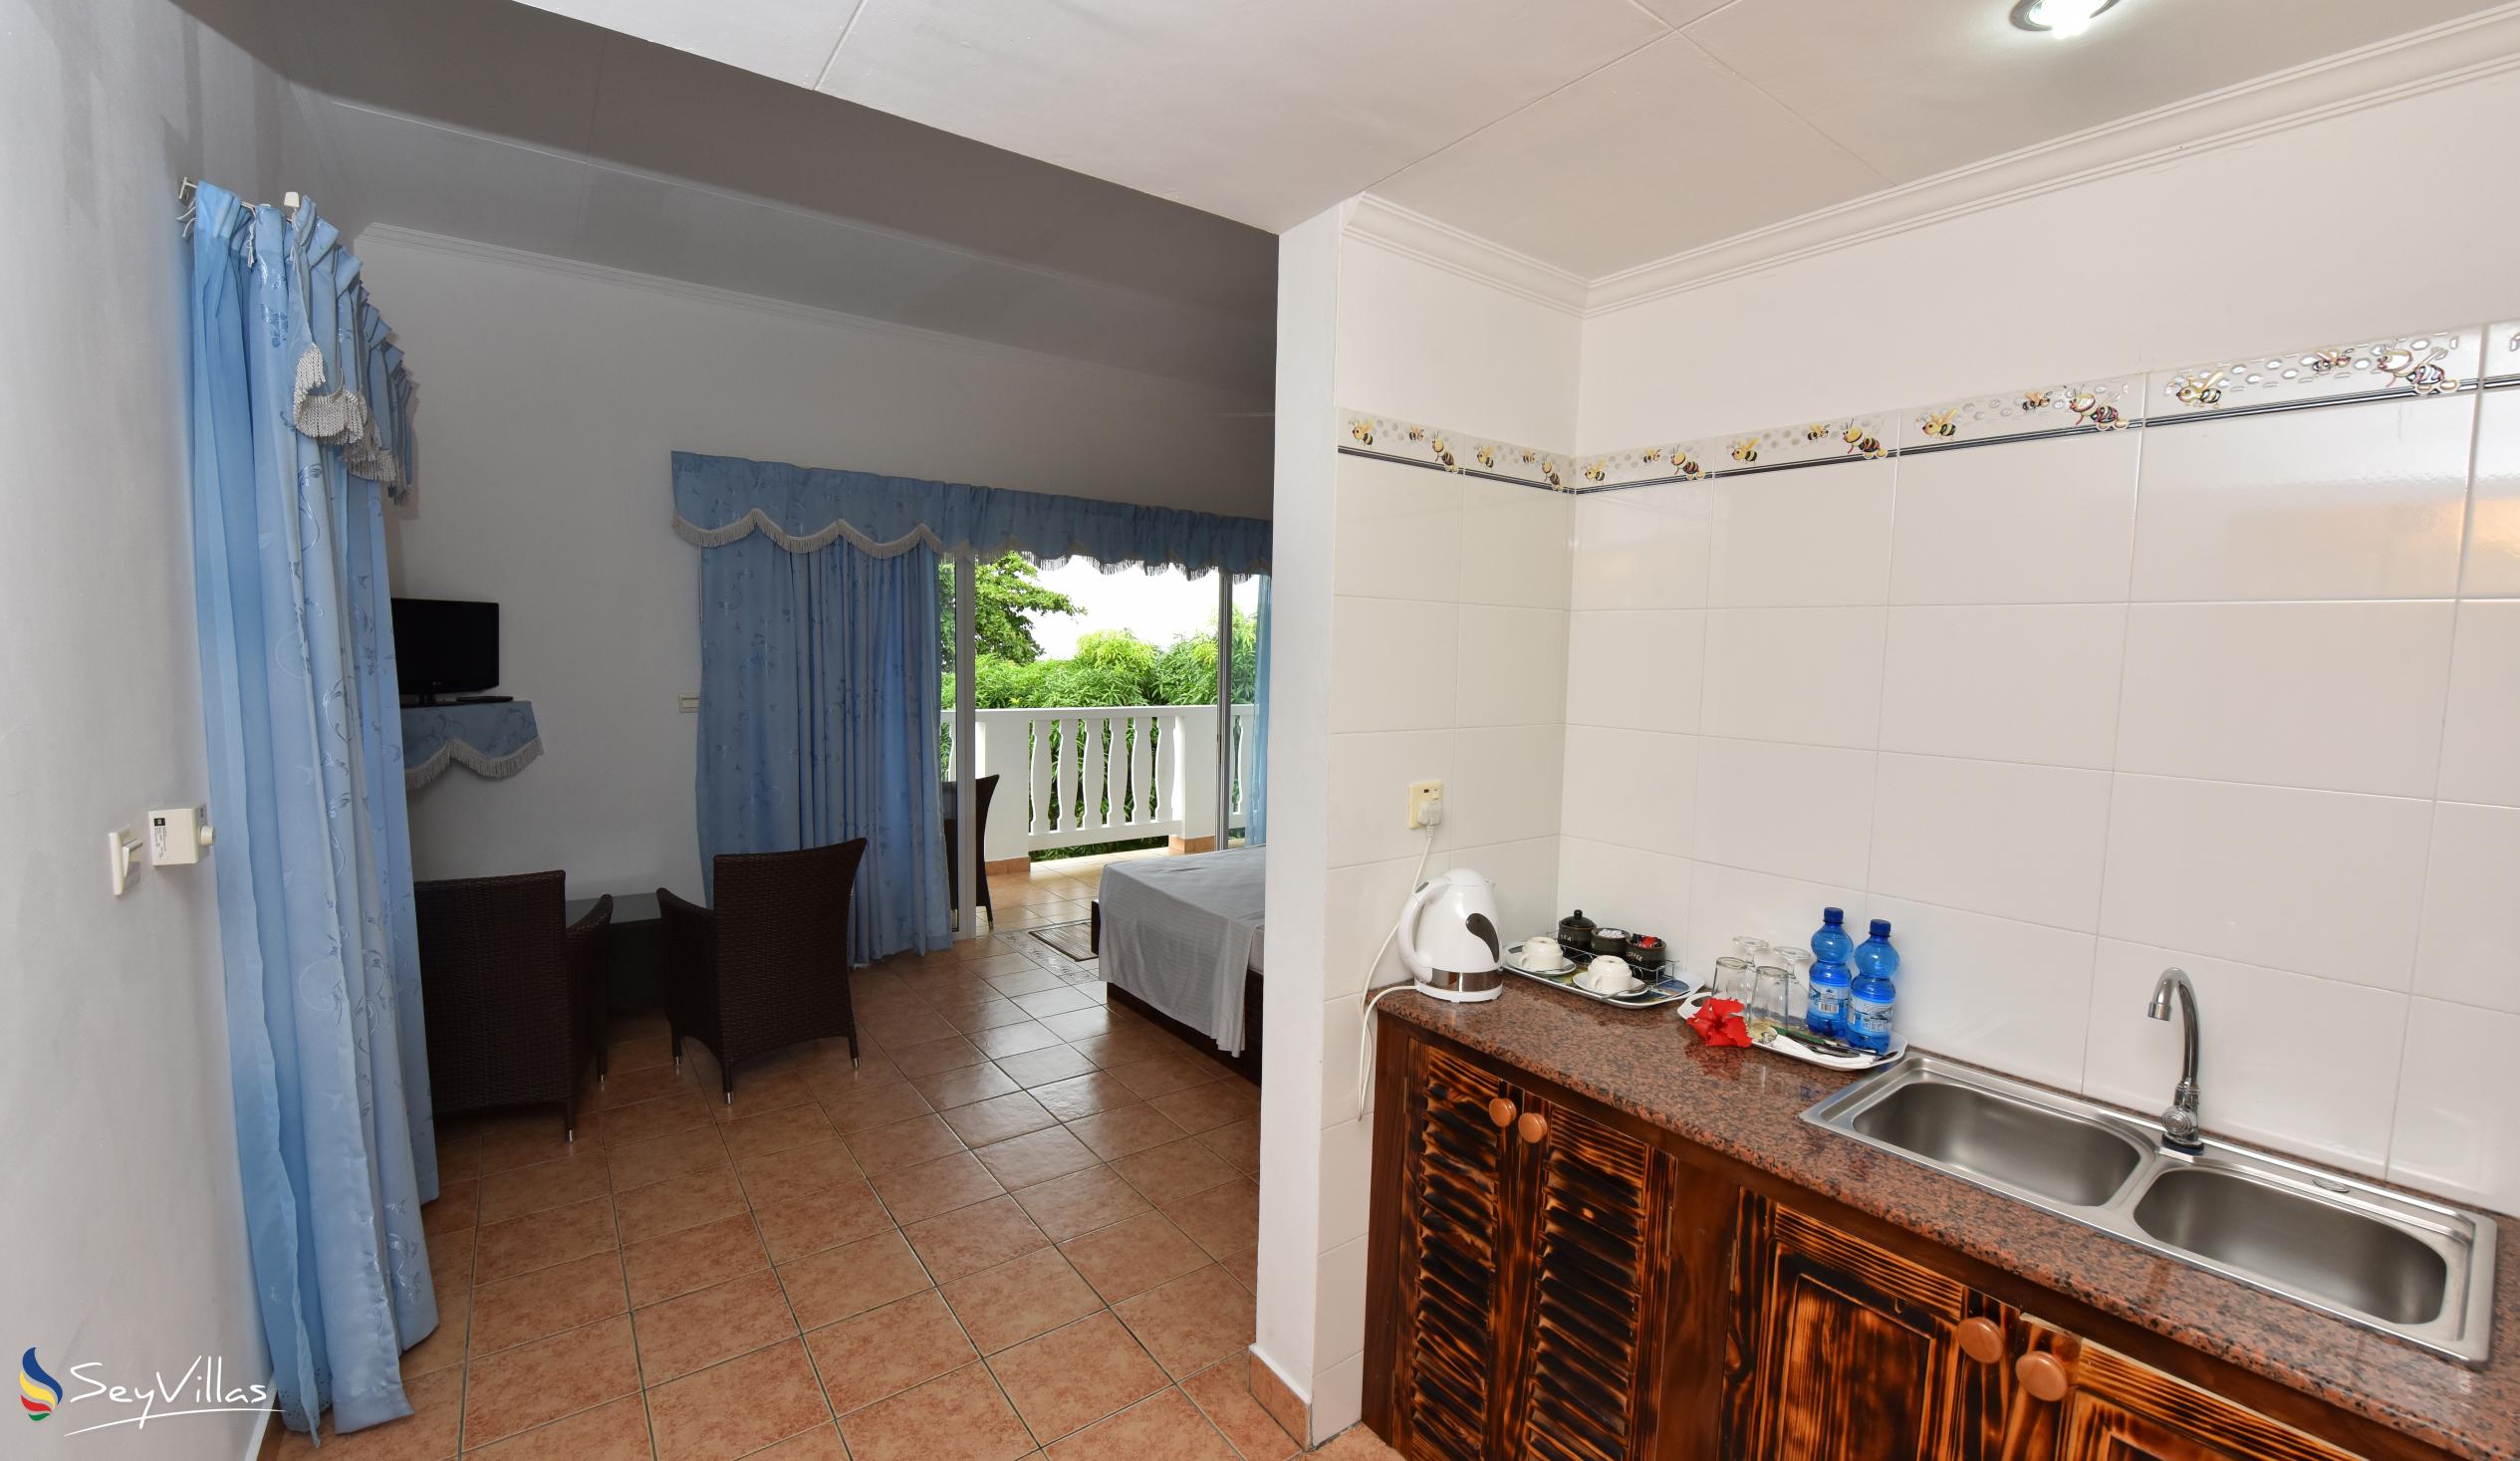 Photo 11: The Diver's Lodge - Standard Room (First Floor) - Mahé (Seychelles)